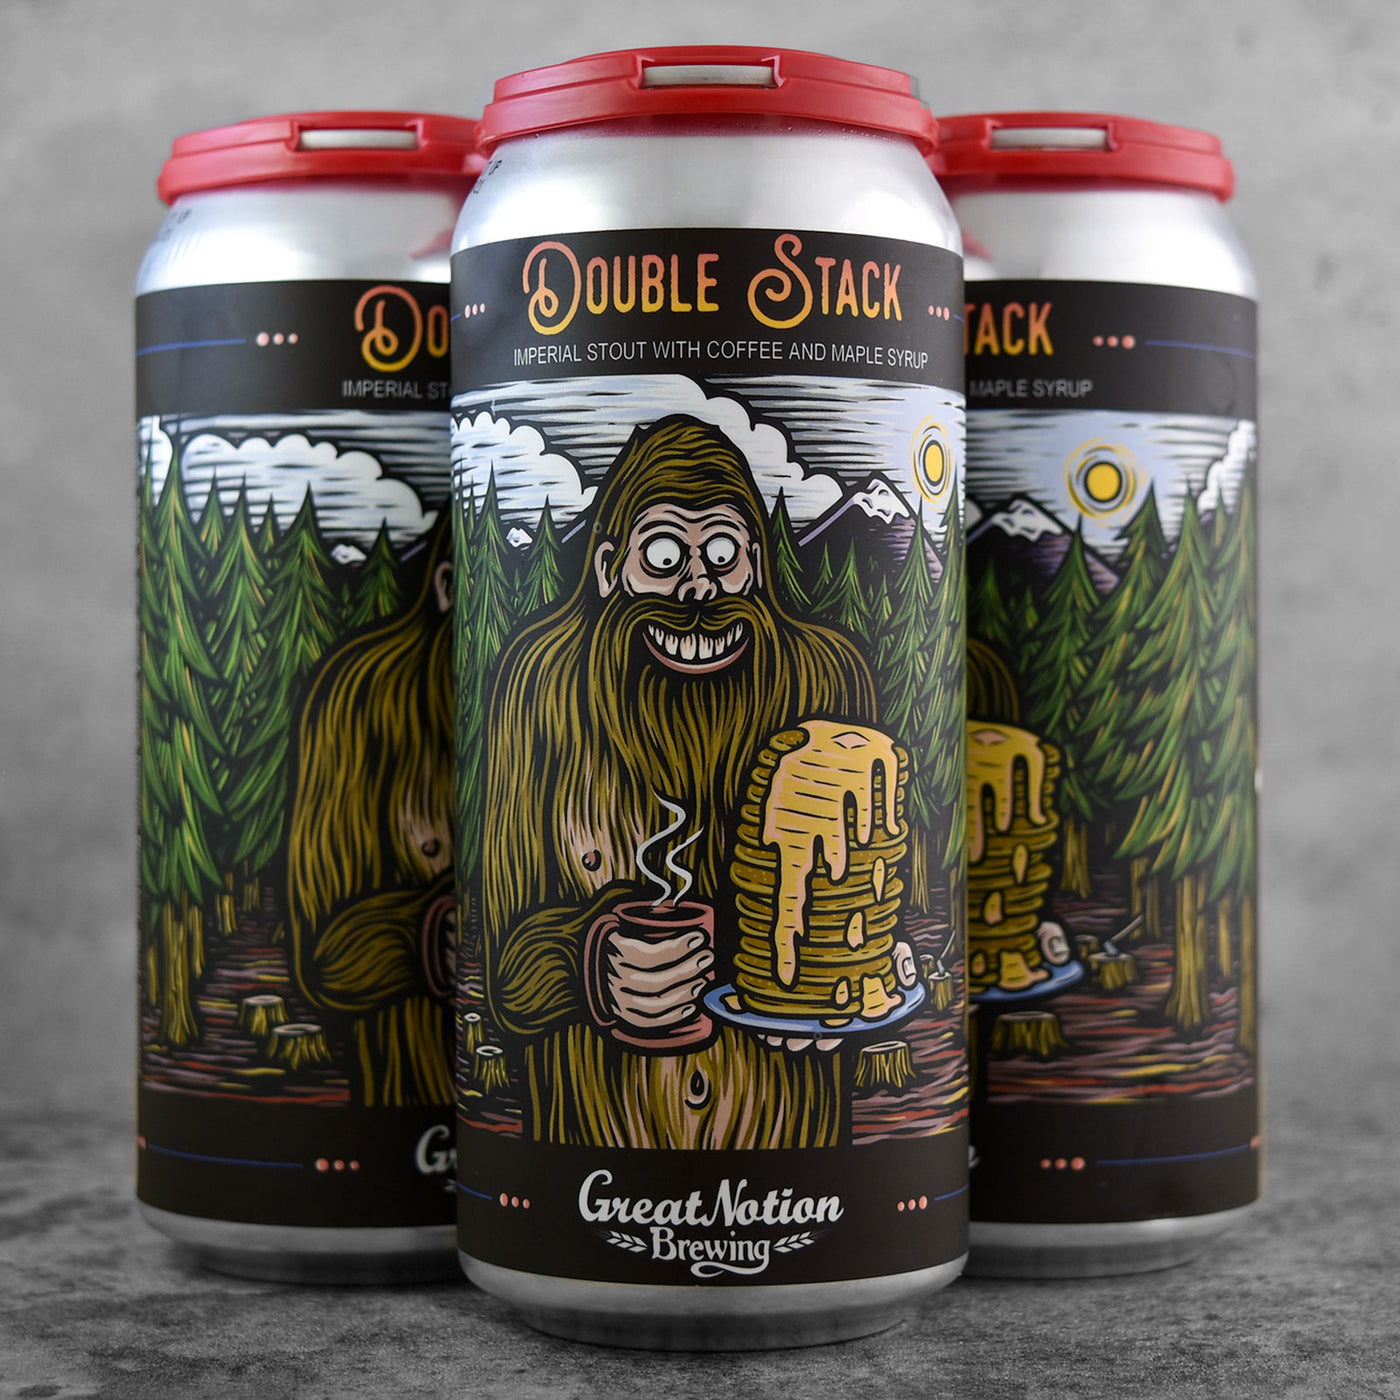 Great Notion Double Stack - "Limit 1"